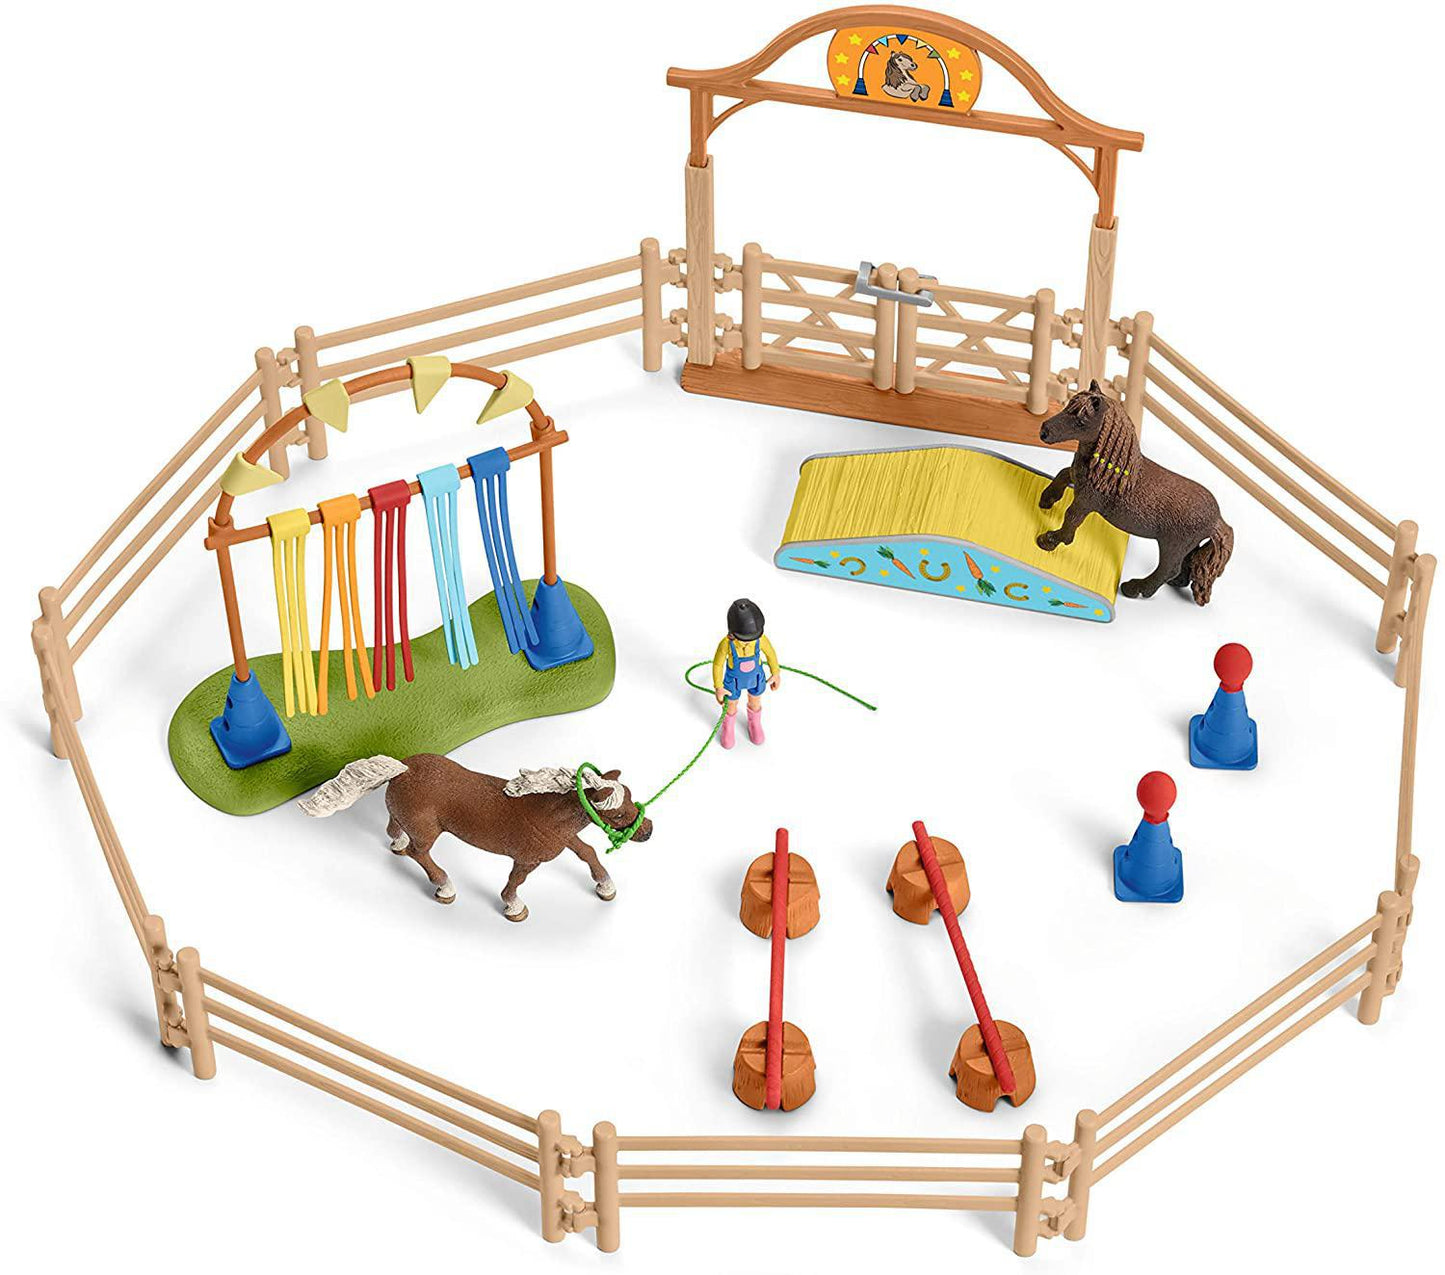 Schleich Farm World Pony Agility Training 41-piece Horse Playset Toy for Kids Ages 3-8